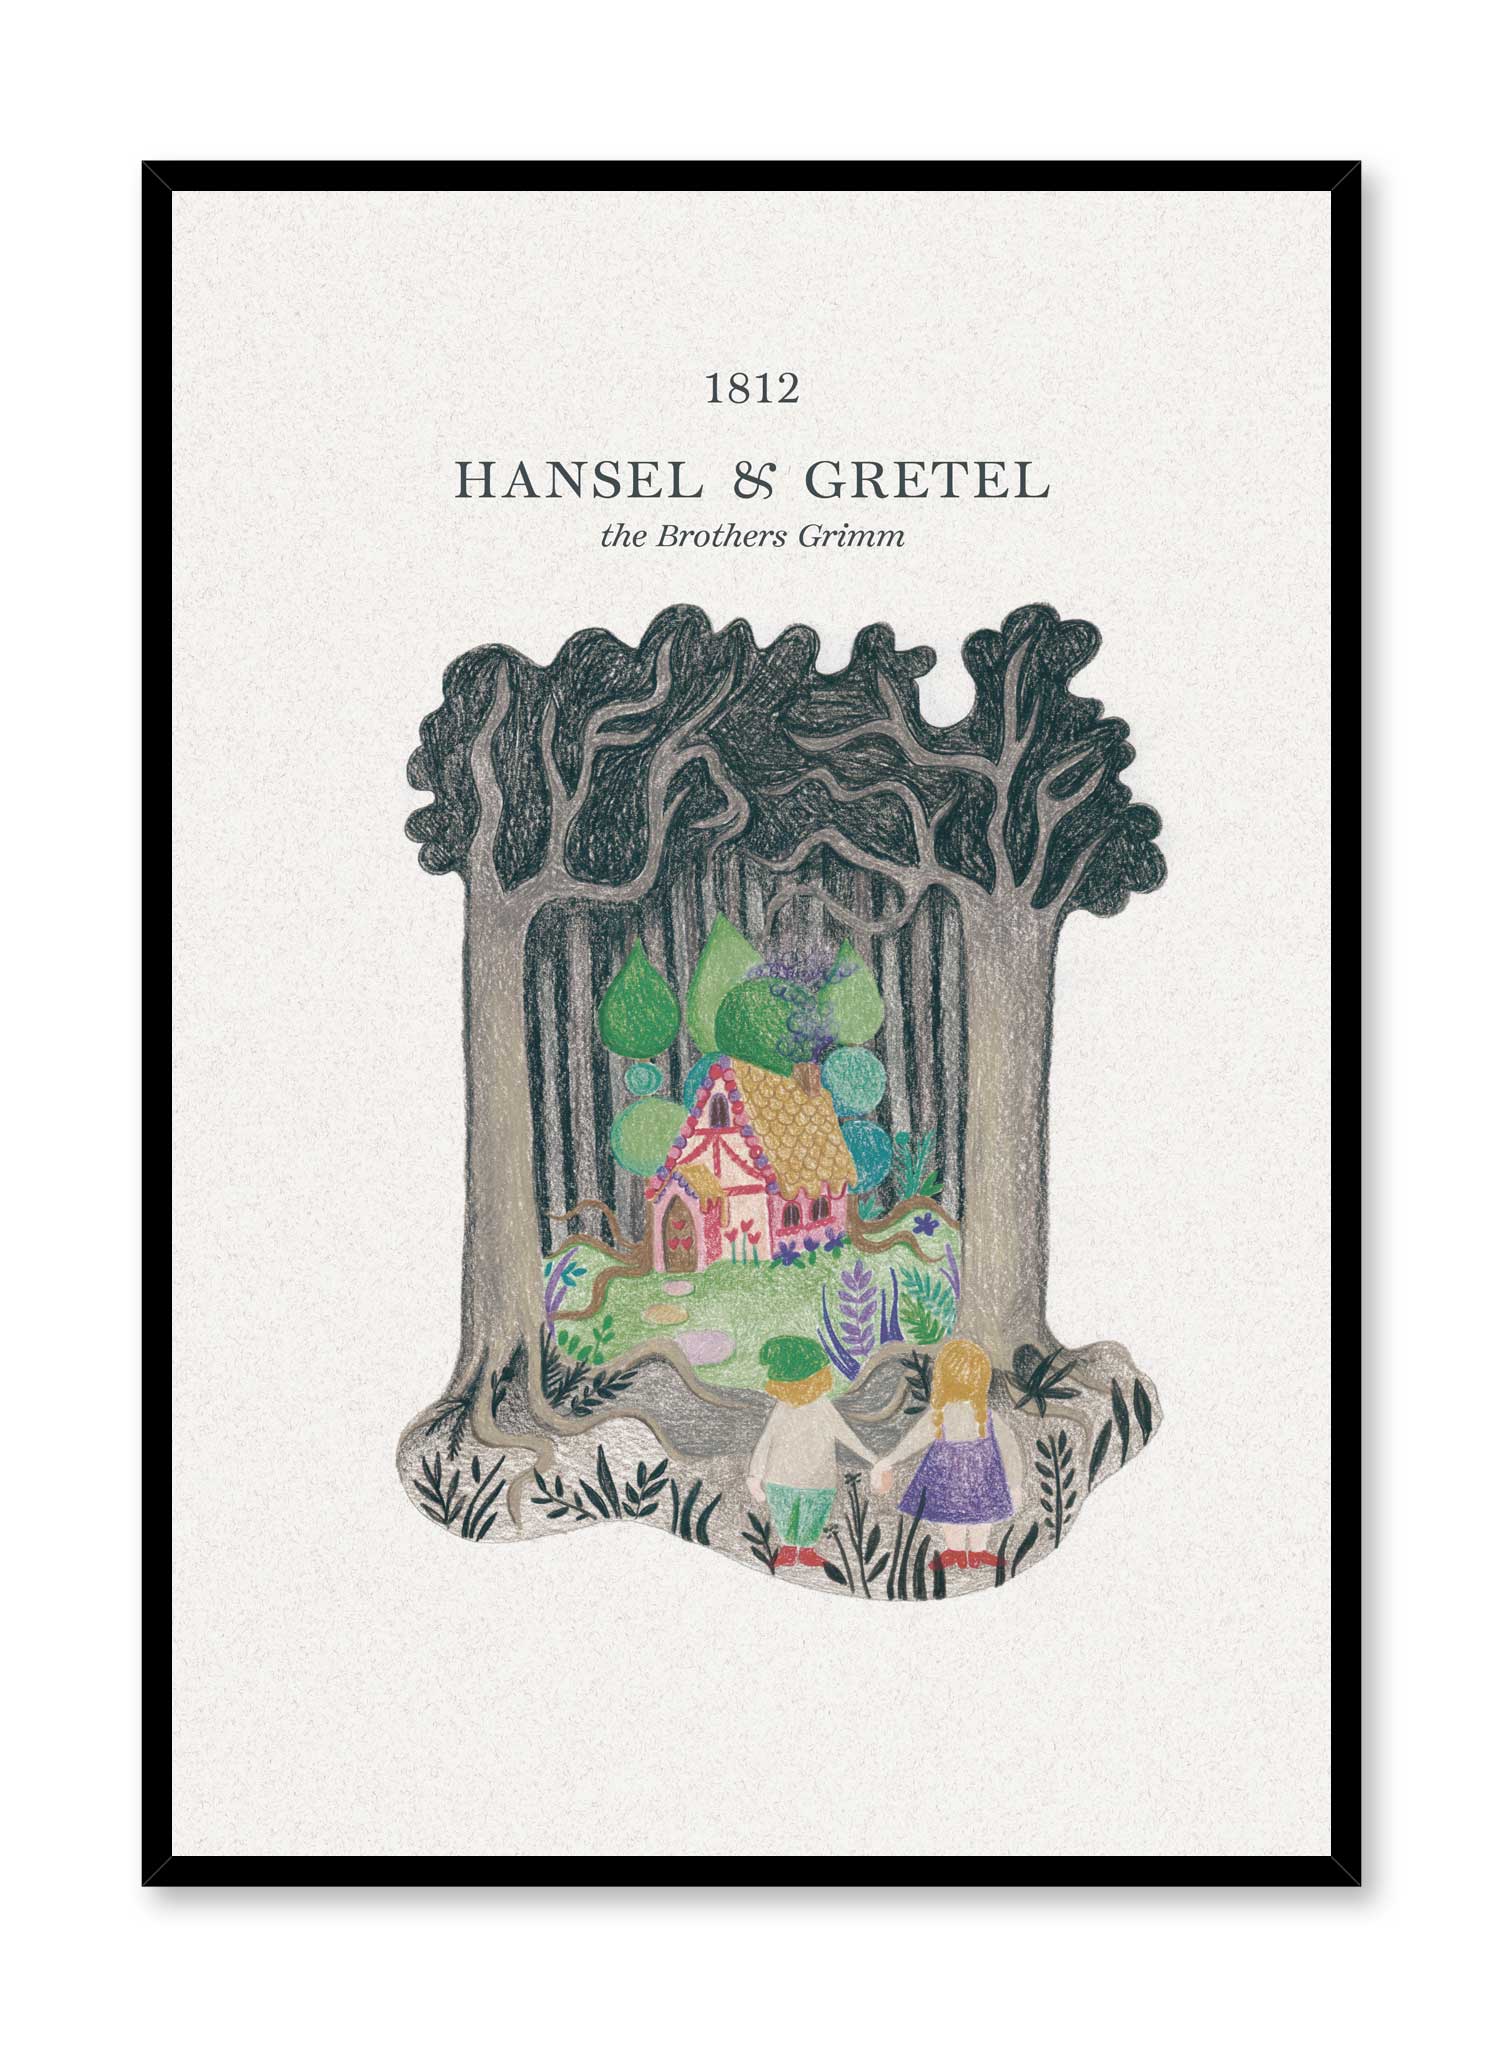 Hansel & Gretel is a minimalist illustration by Opposite Wall of the Brothers Grimm's Hansel & Gretel walking towards that tempting candy house.